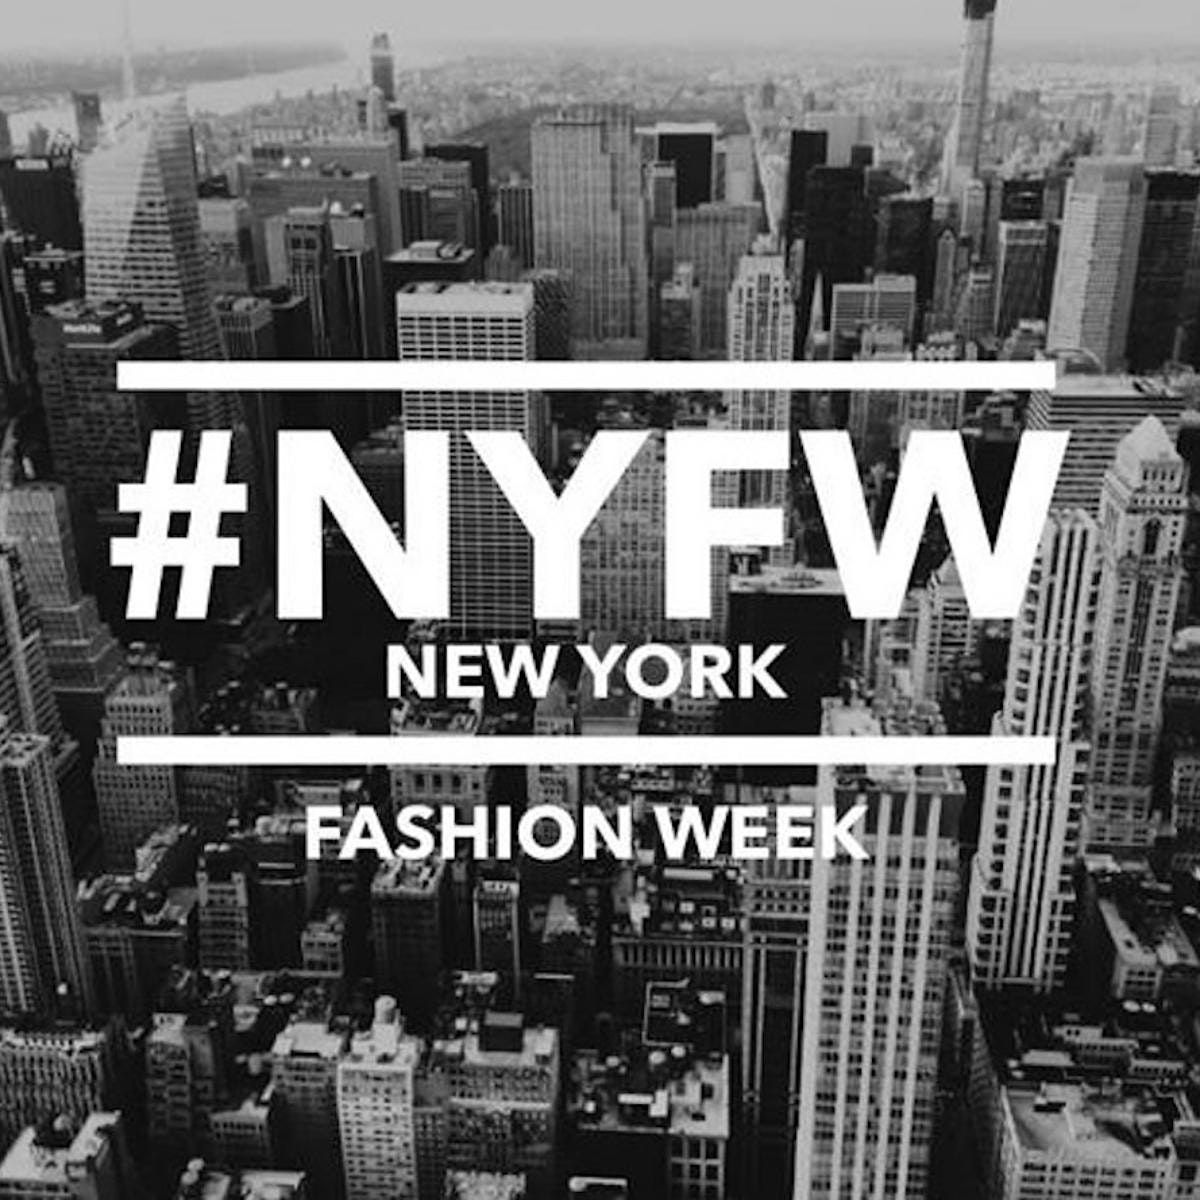 Kids Designers Wanted for NYFW Runway Show